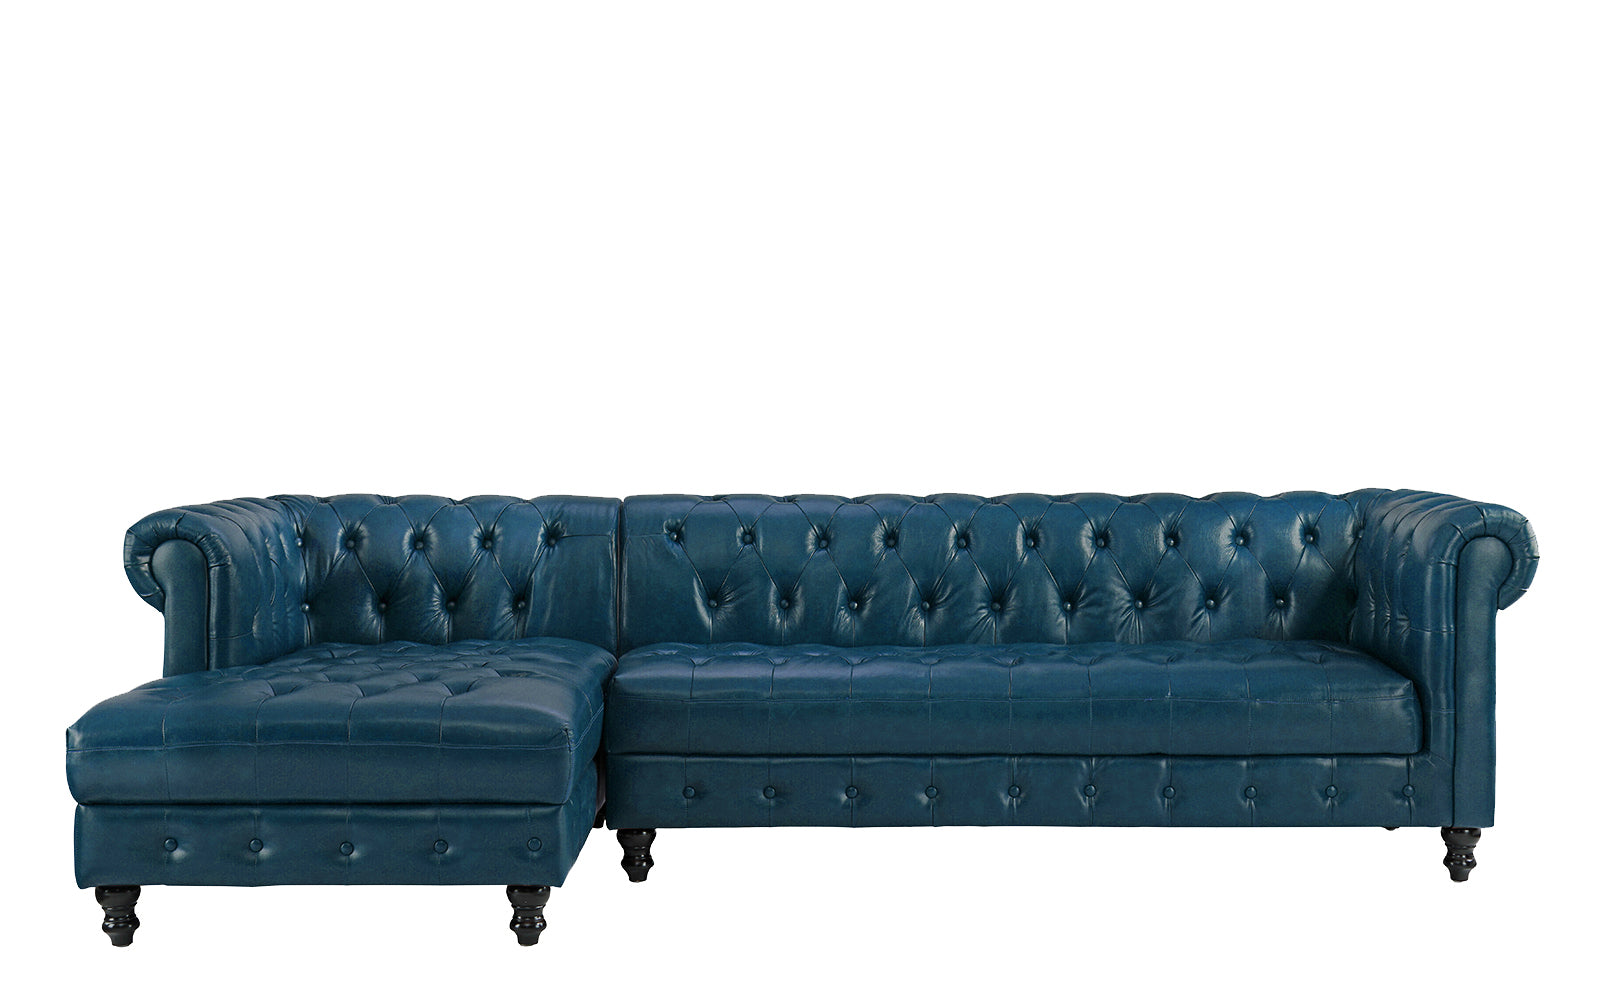 Ivan Victorian-Style Leather Match Sectional (Left)